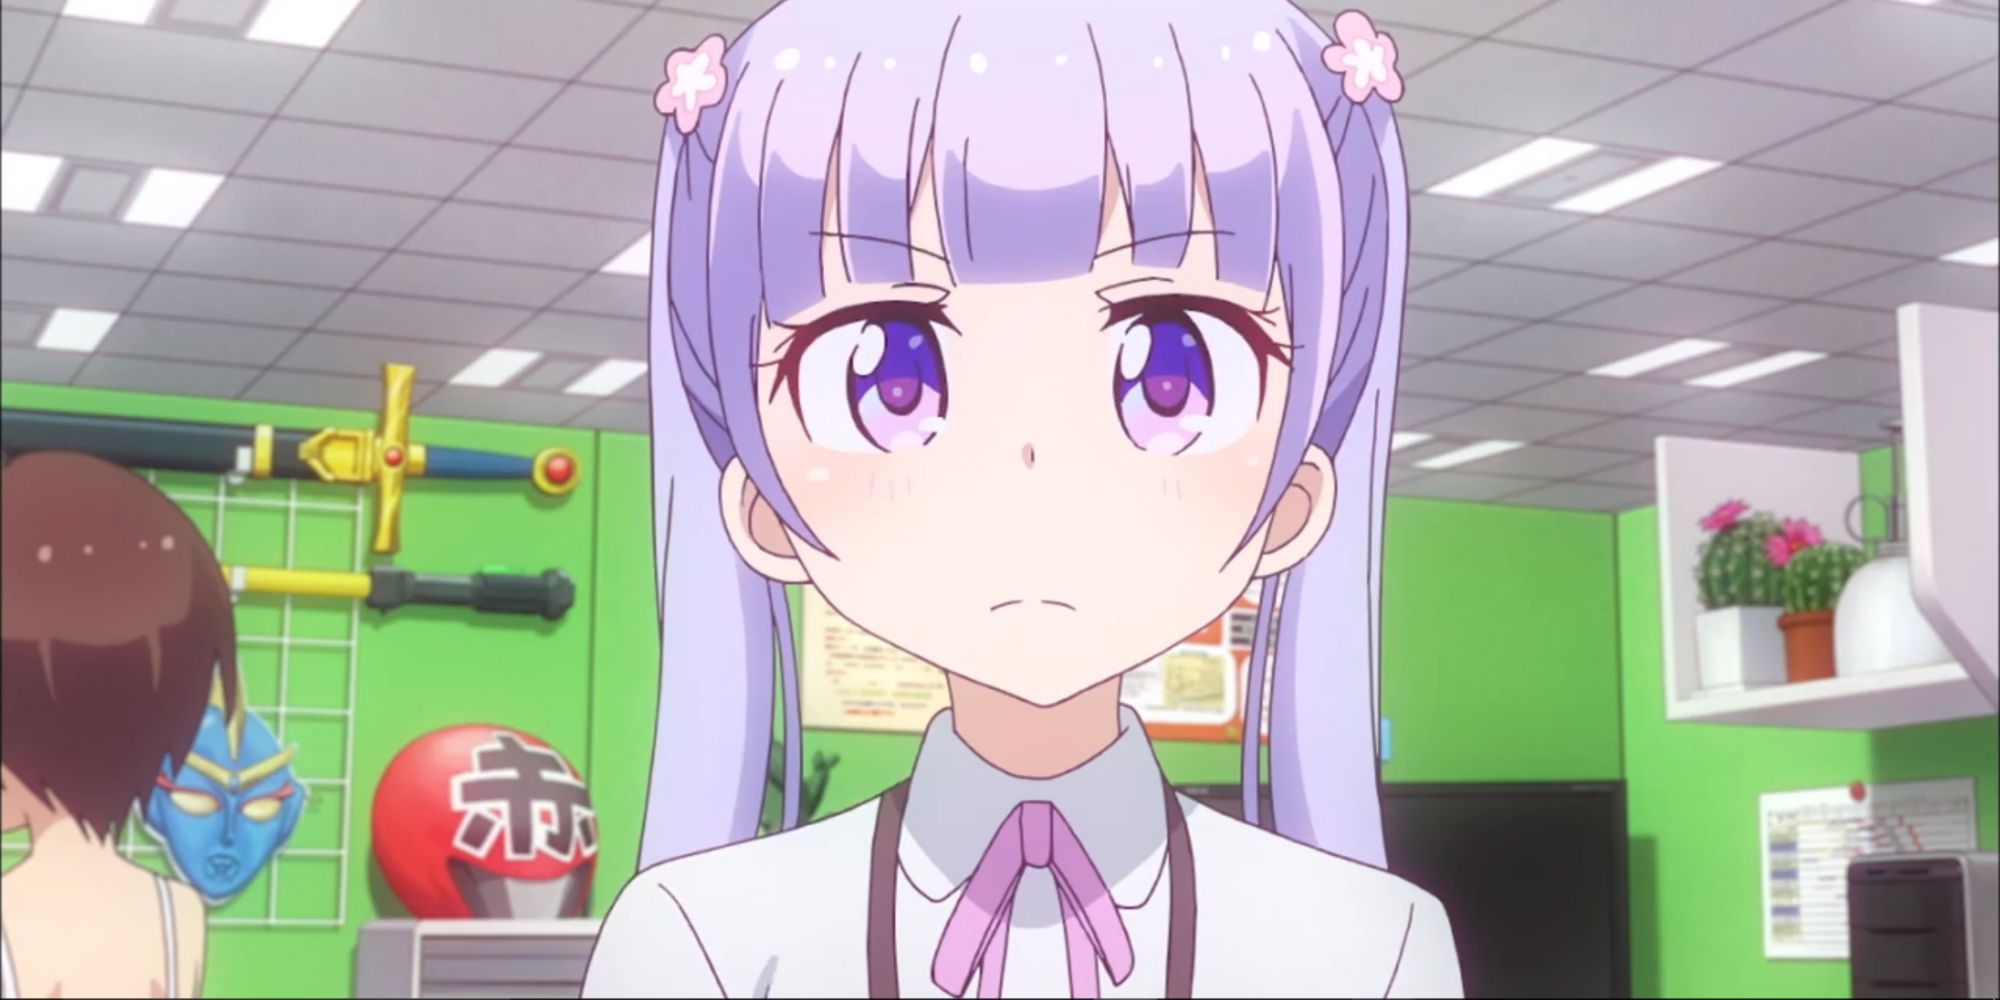 Aoba from New Game! standing in a cubicle with prop weapons on the wall